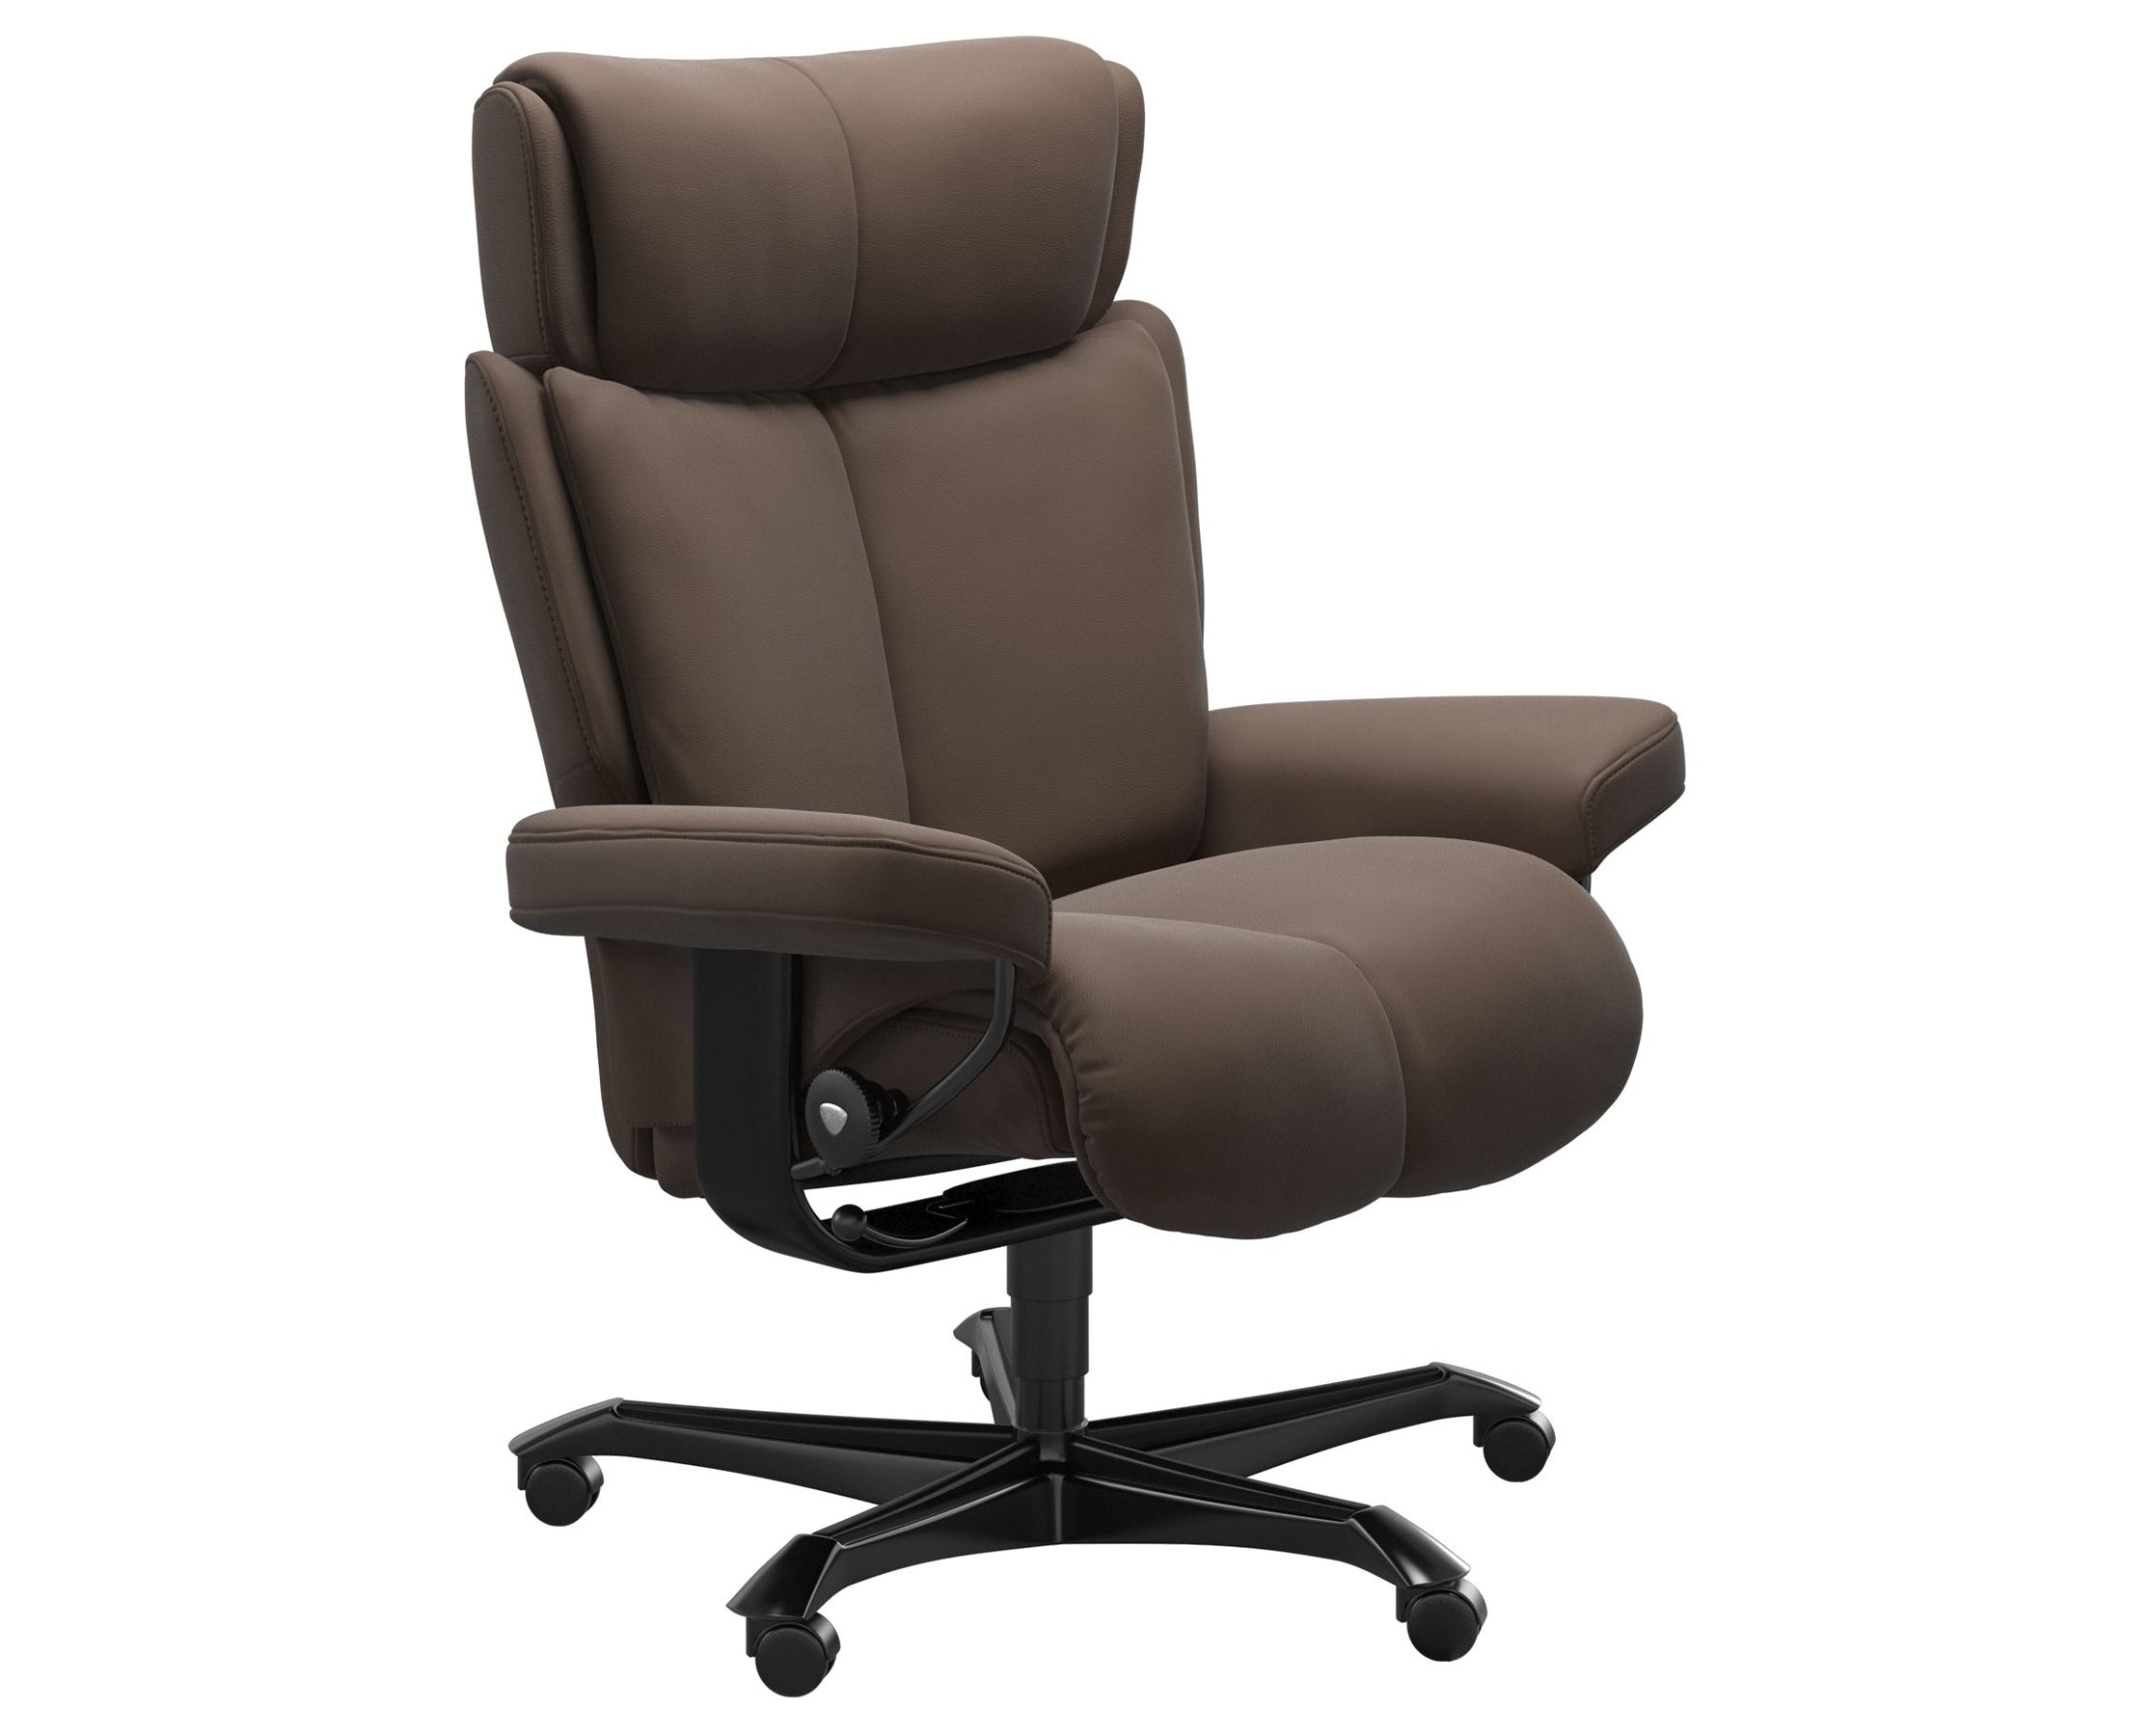 Paloma Leather Espresso M and Black Base | Stressless Magic Home Office Chair | Valley Ridge Furniture